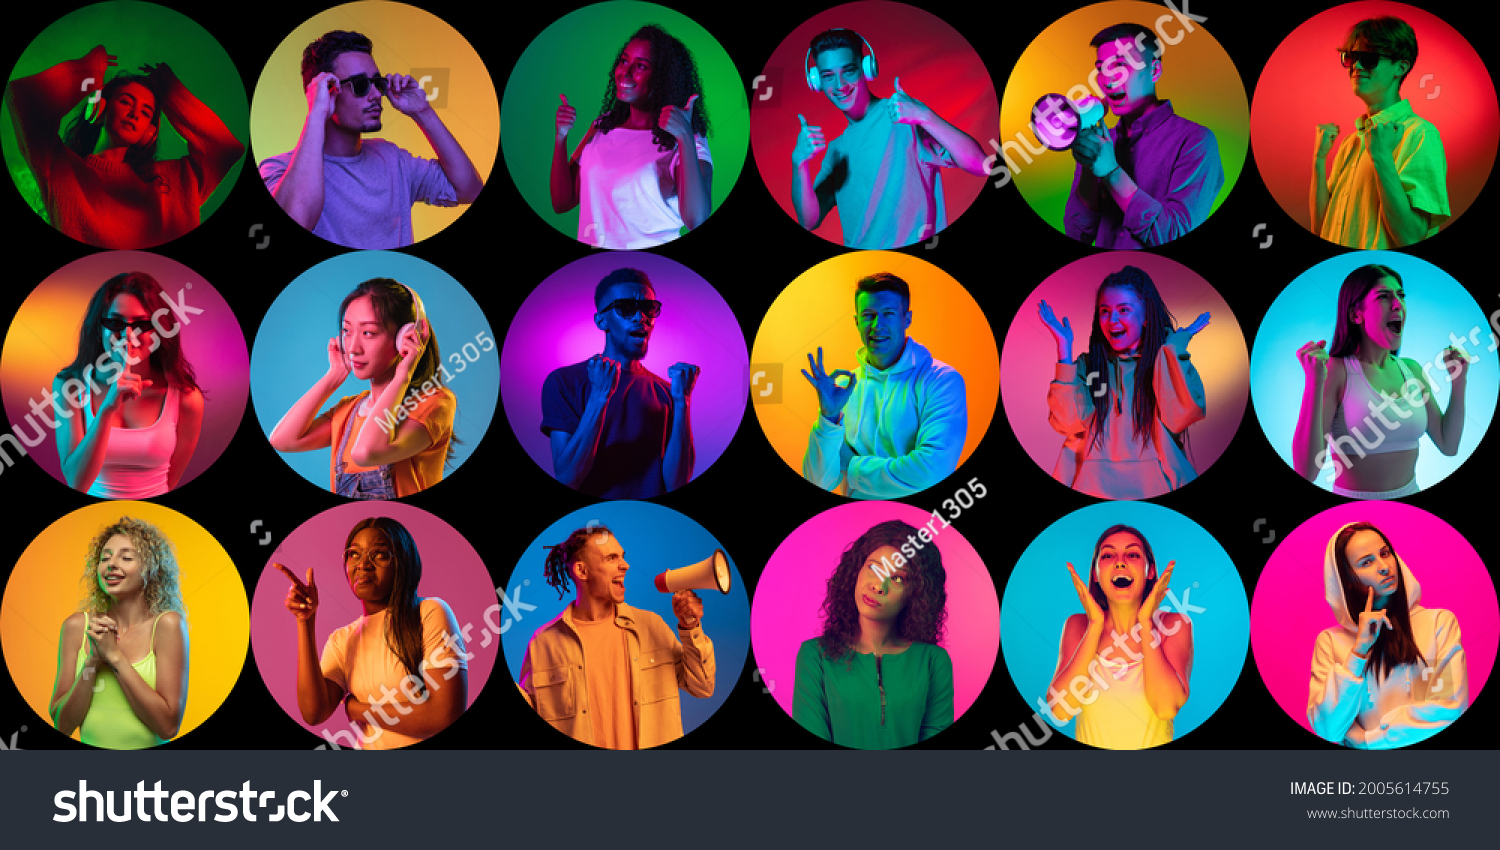 Photos in a round frame. Portraits of different people on multicolored background in neon light. Flyer, collage made of models. Concept of emotions, facial expression, sales, advertising. #2005614755